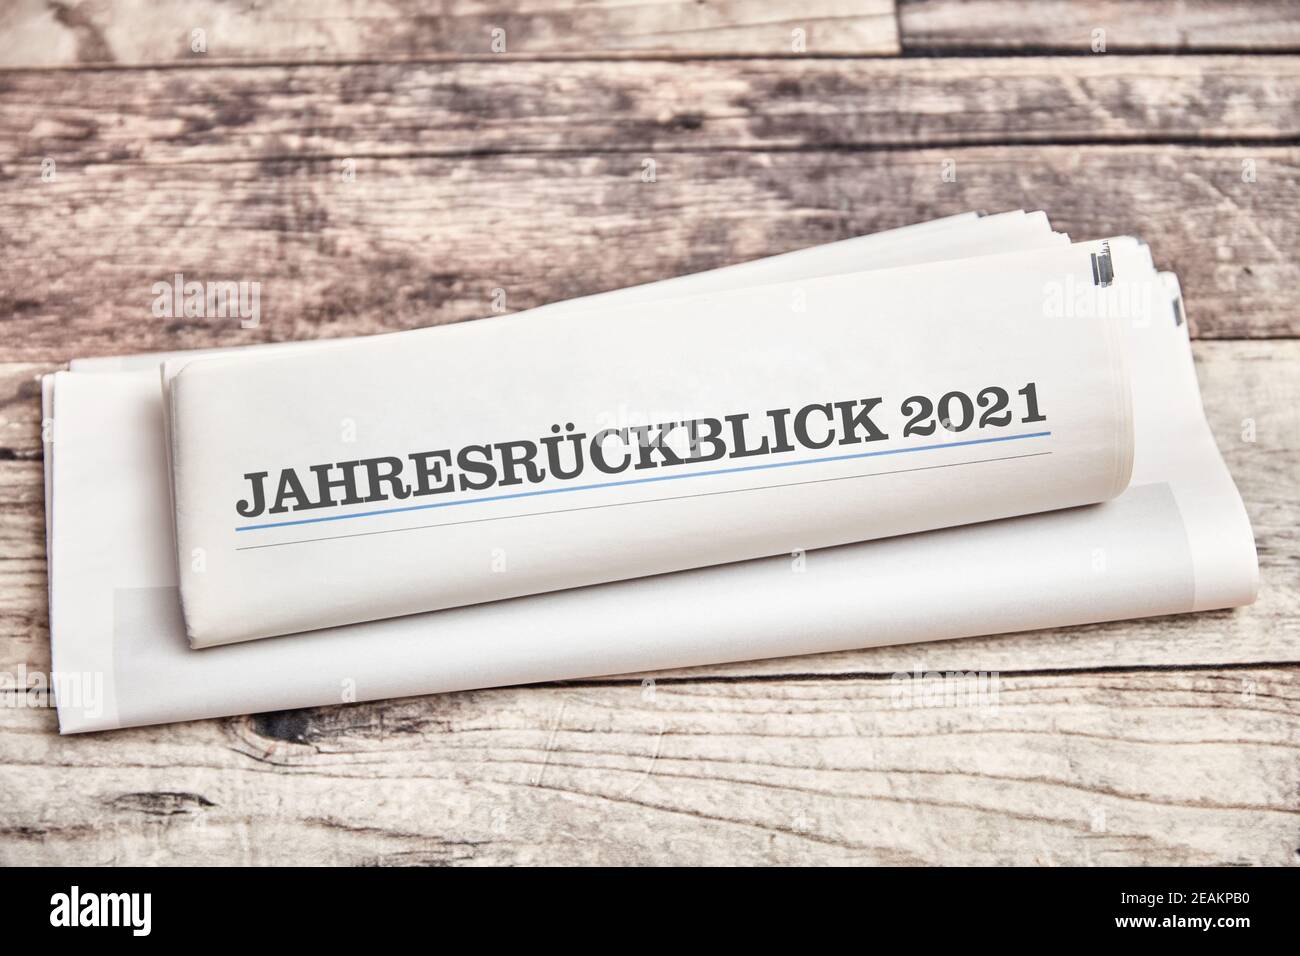 Jahresrückblick 2021 (German for: annual review 2021) on a folded newspaper as the front page Stock Photo